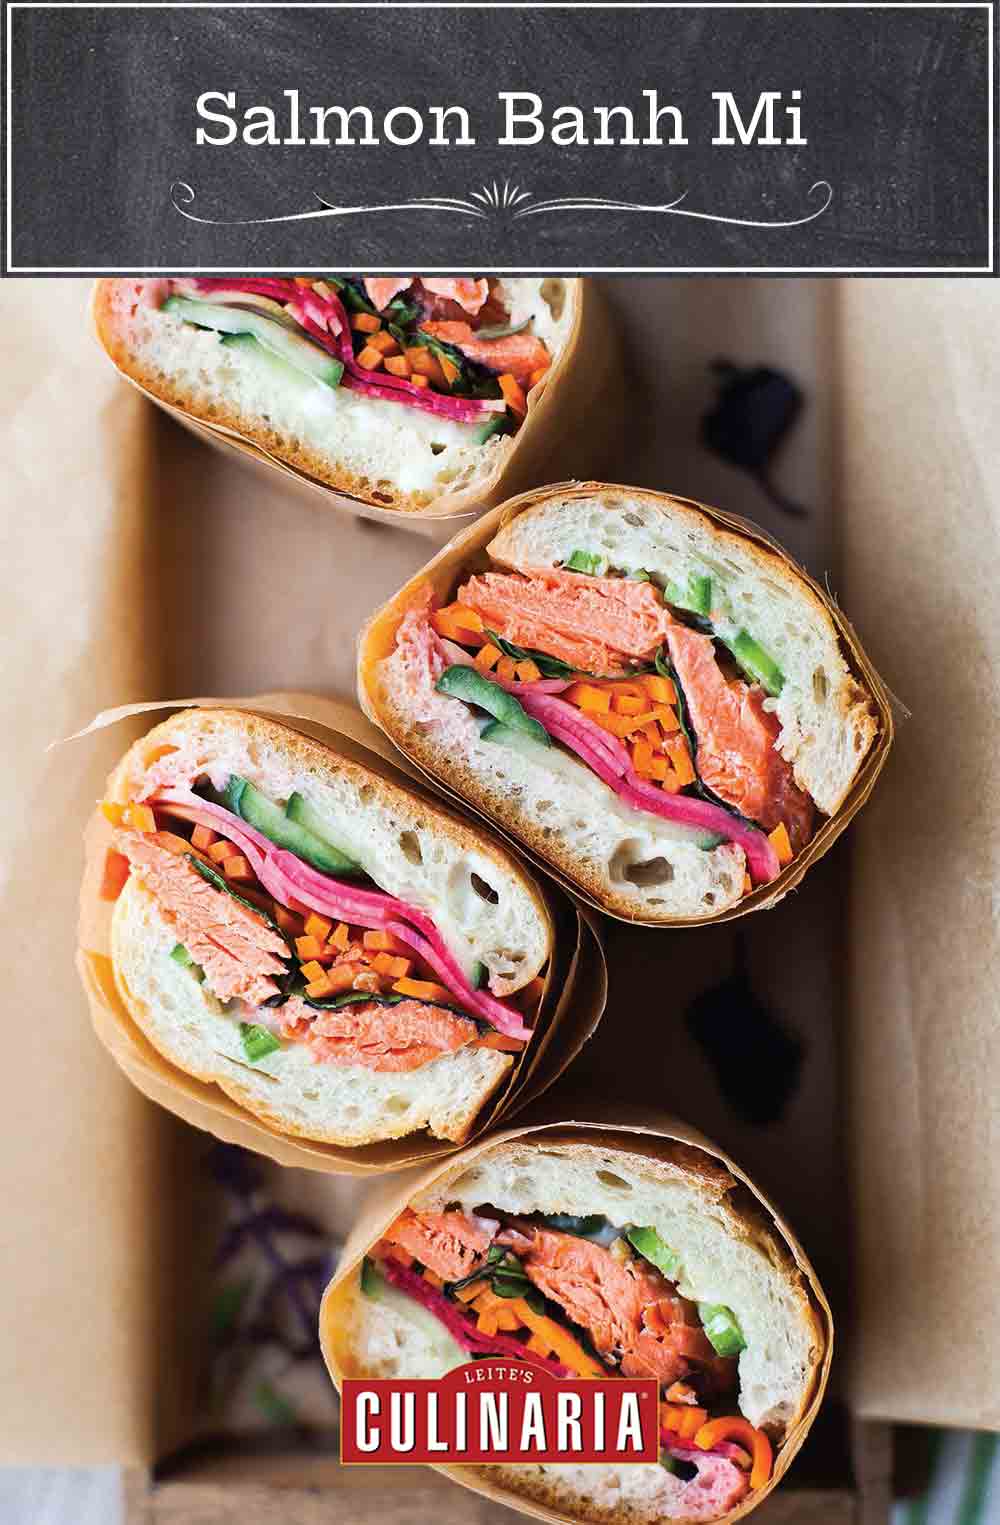 Four pieces of salmon banh mi wrapped in paper in a box.